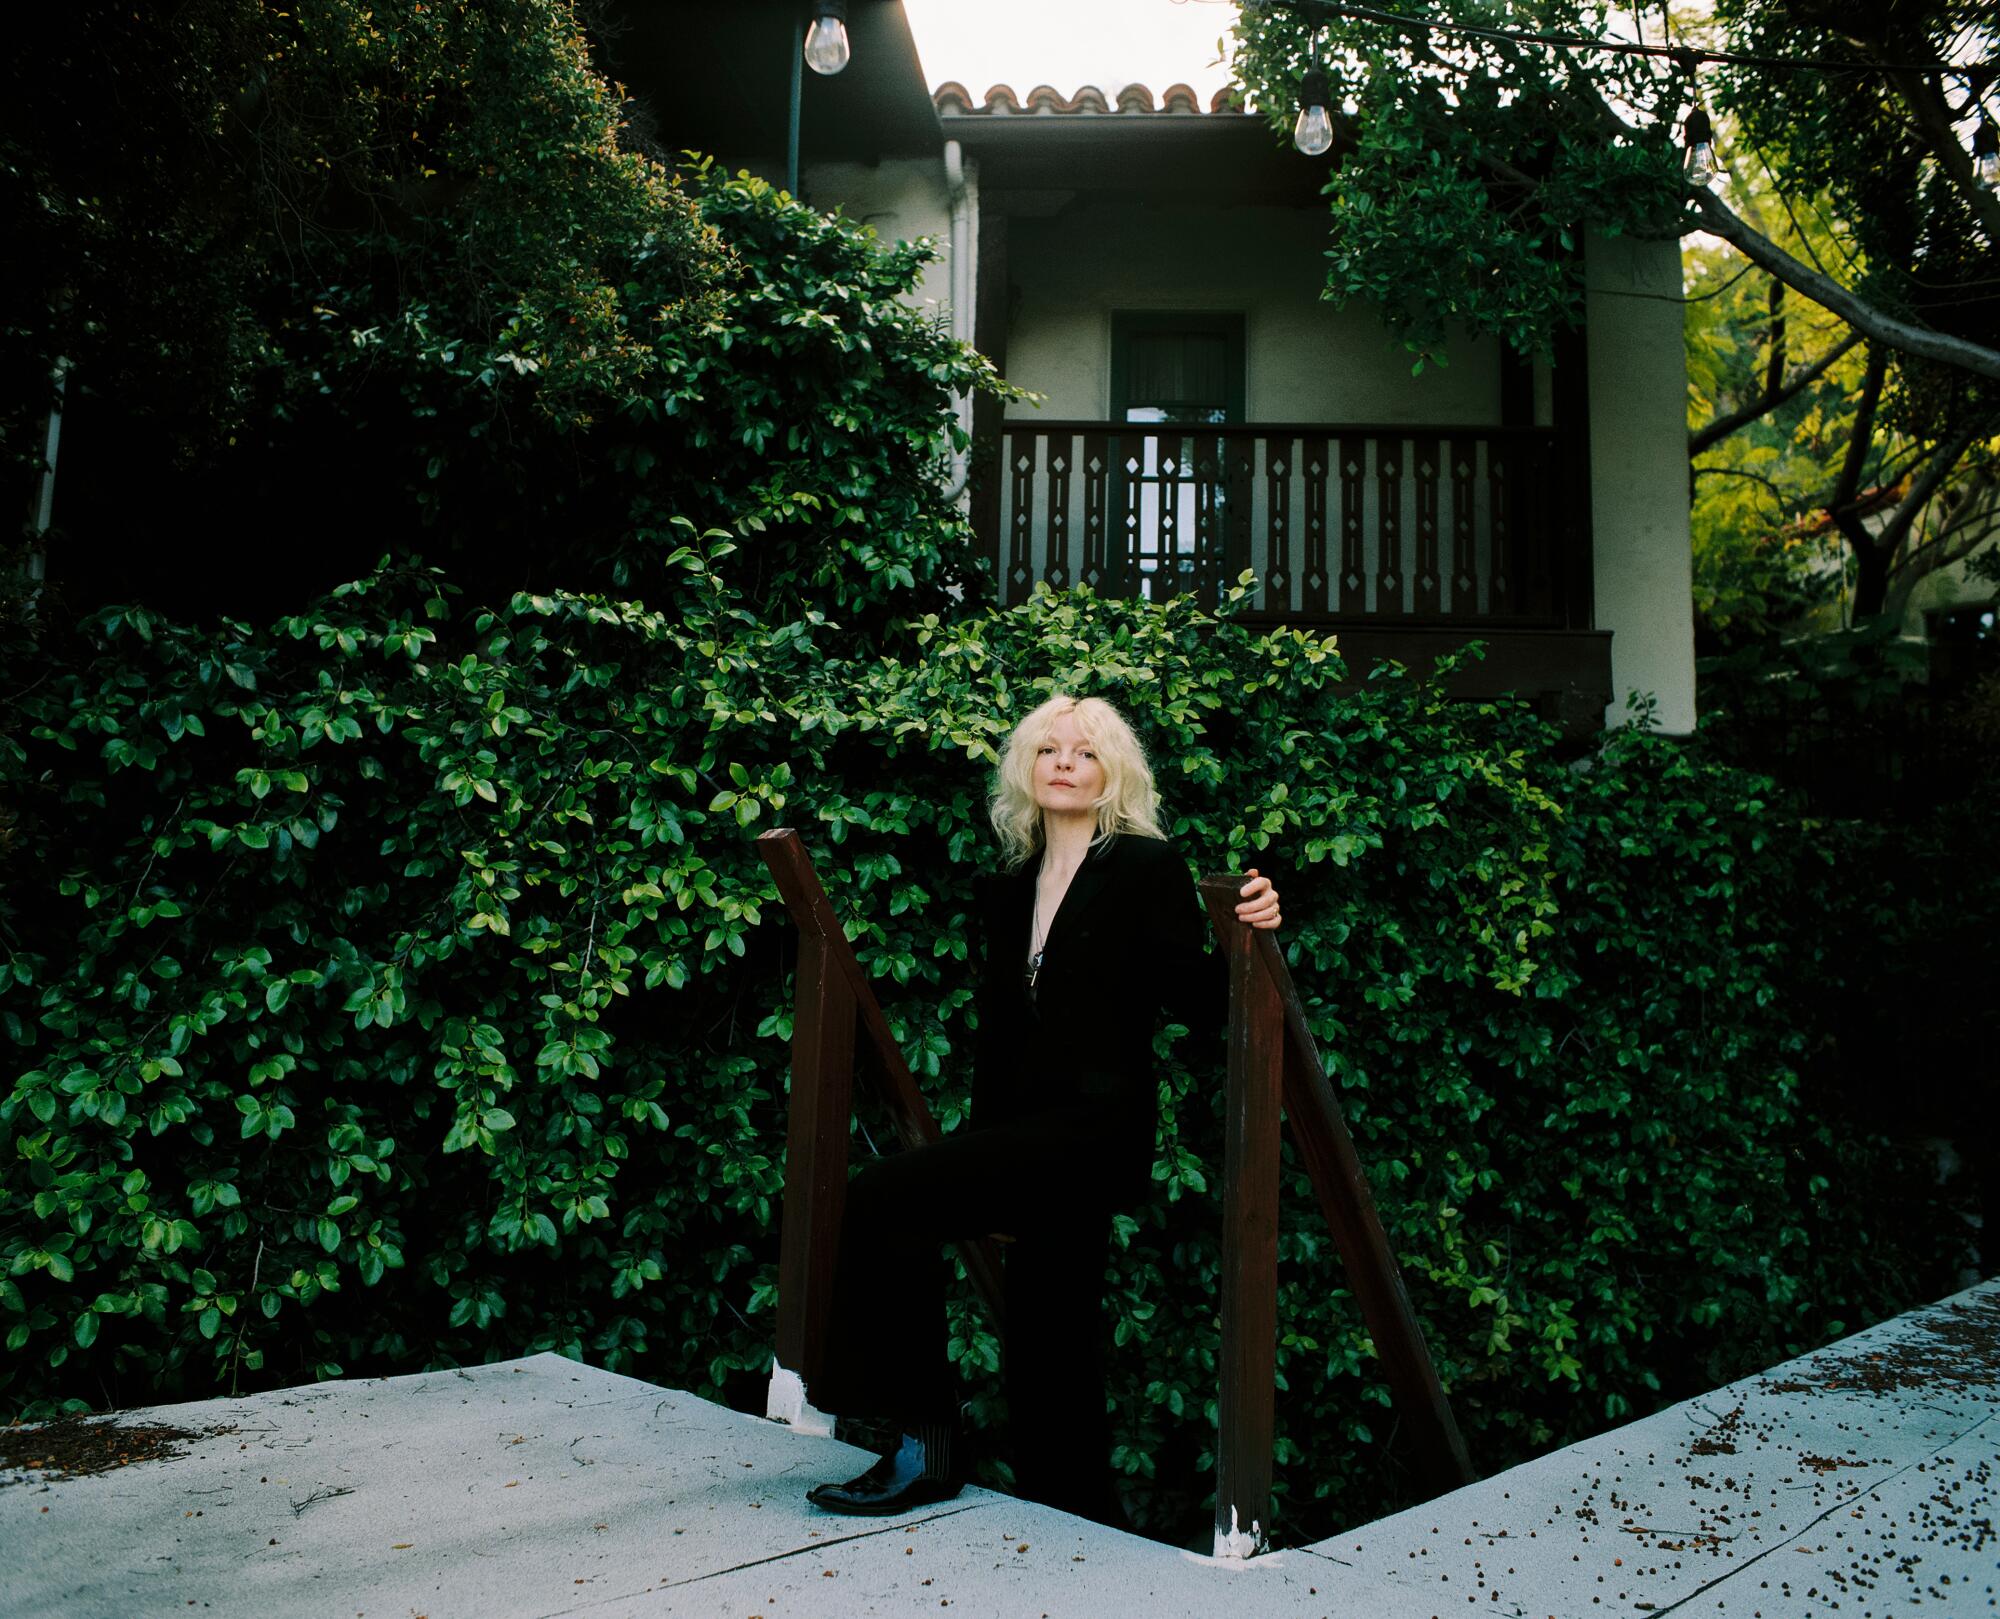 Jessica Pratt stands in front of a greenery-covered fence at the In Sheep's Clothing HQ.